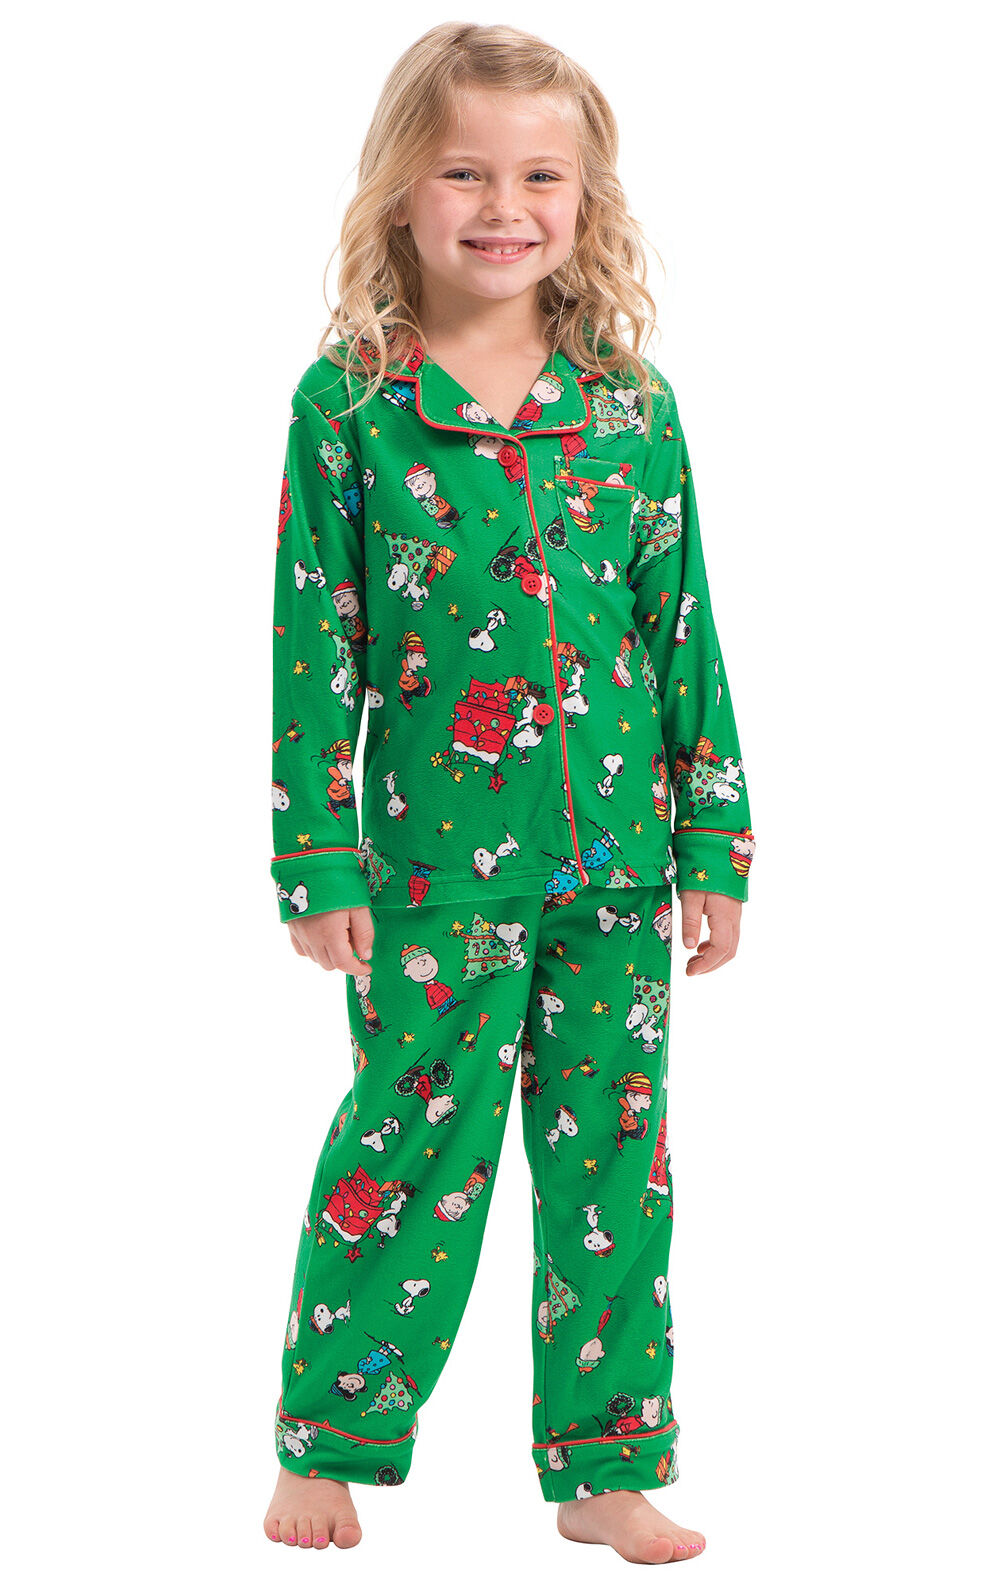 PEANUTS TODDLER UNISEX CHRISTMAS PJs NWT 889799880631 SIZE 3T PEANUTS GANG 